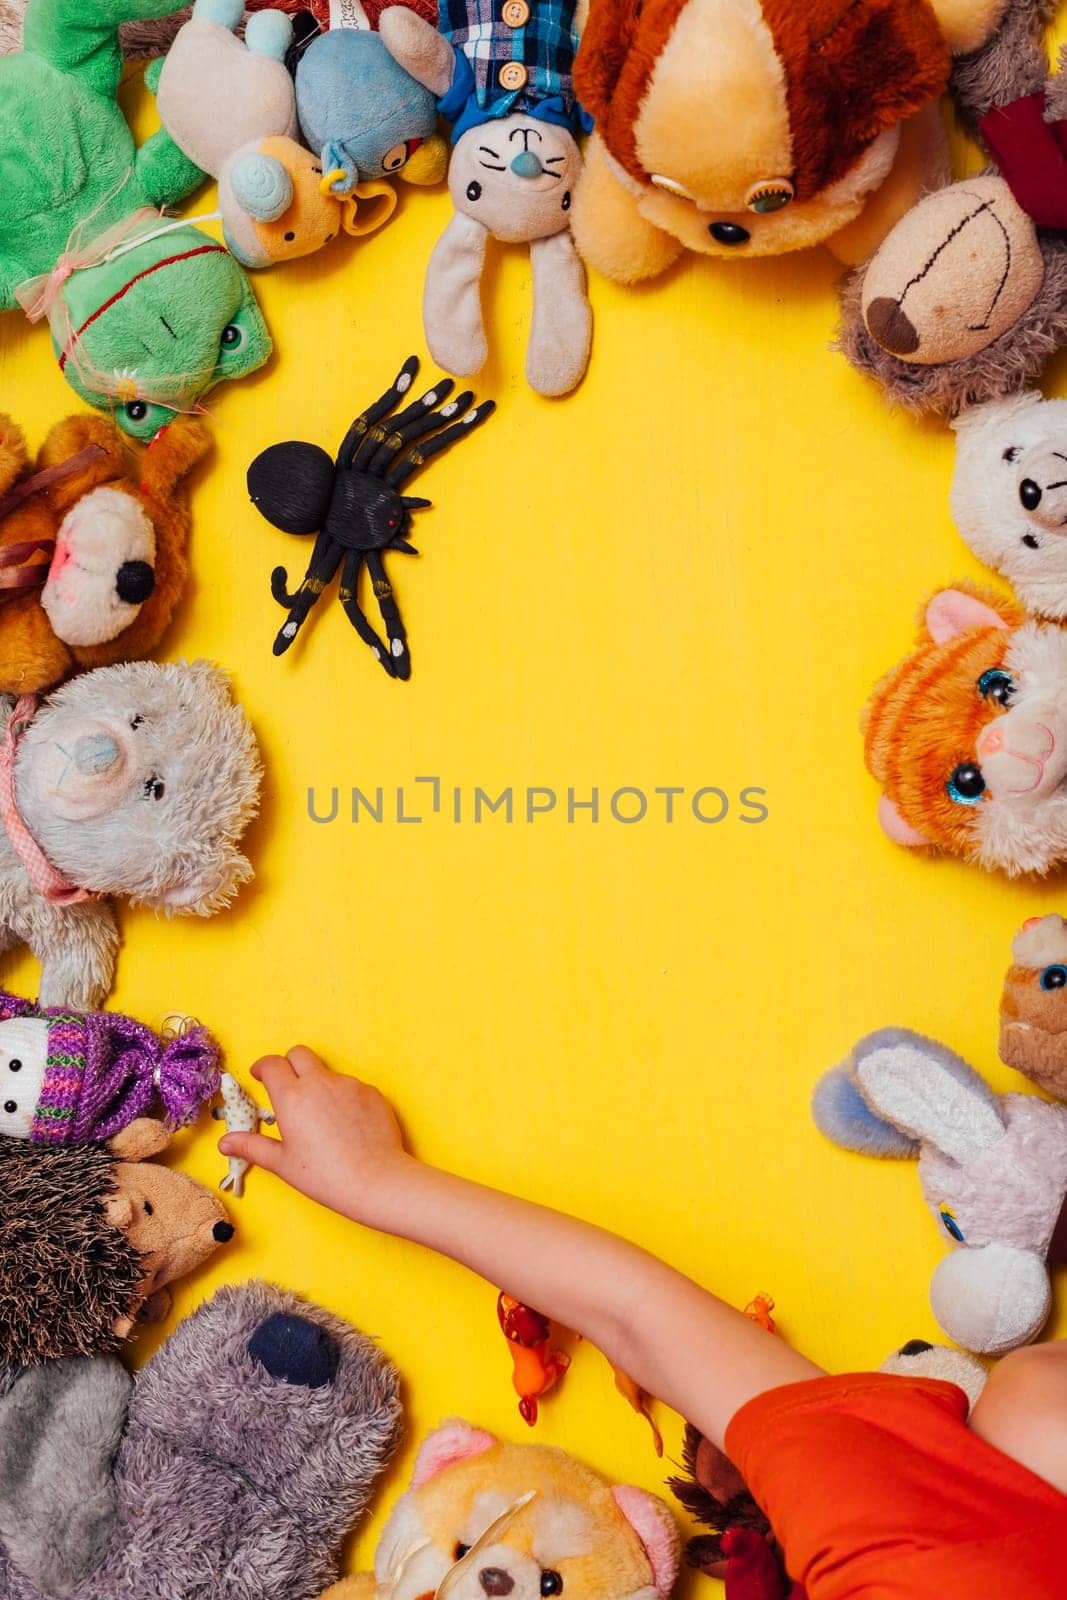 lots of children's soft toy for developing games as a background by Simakov